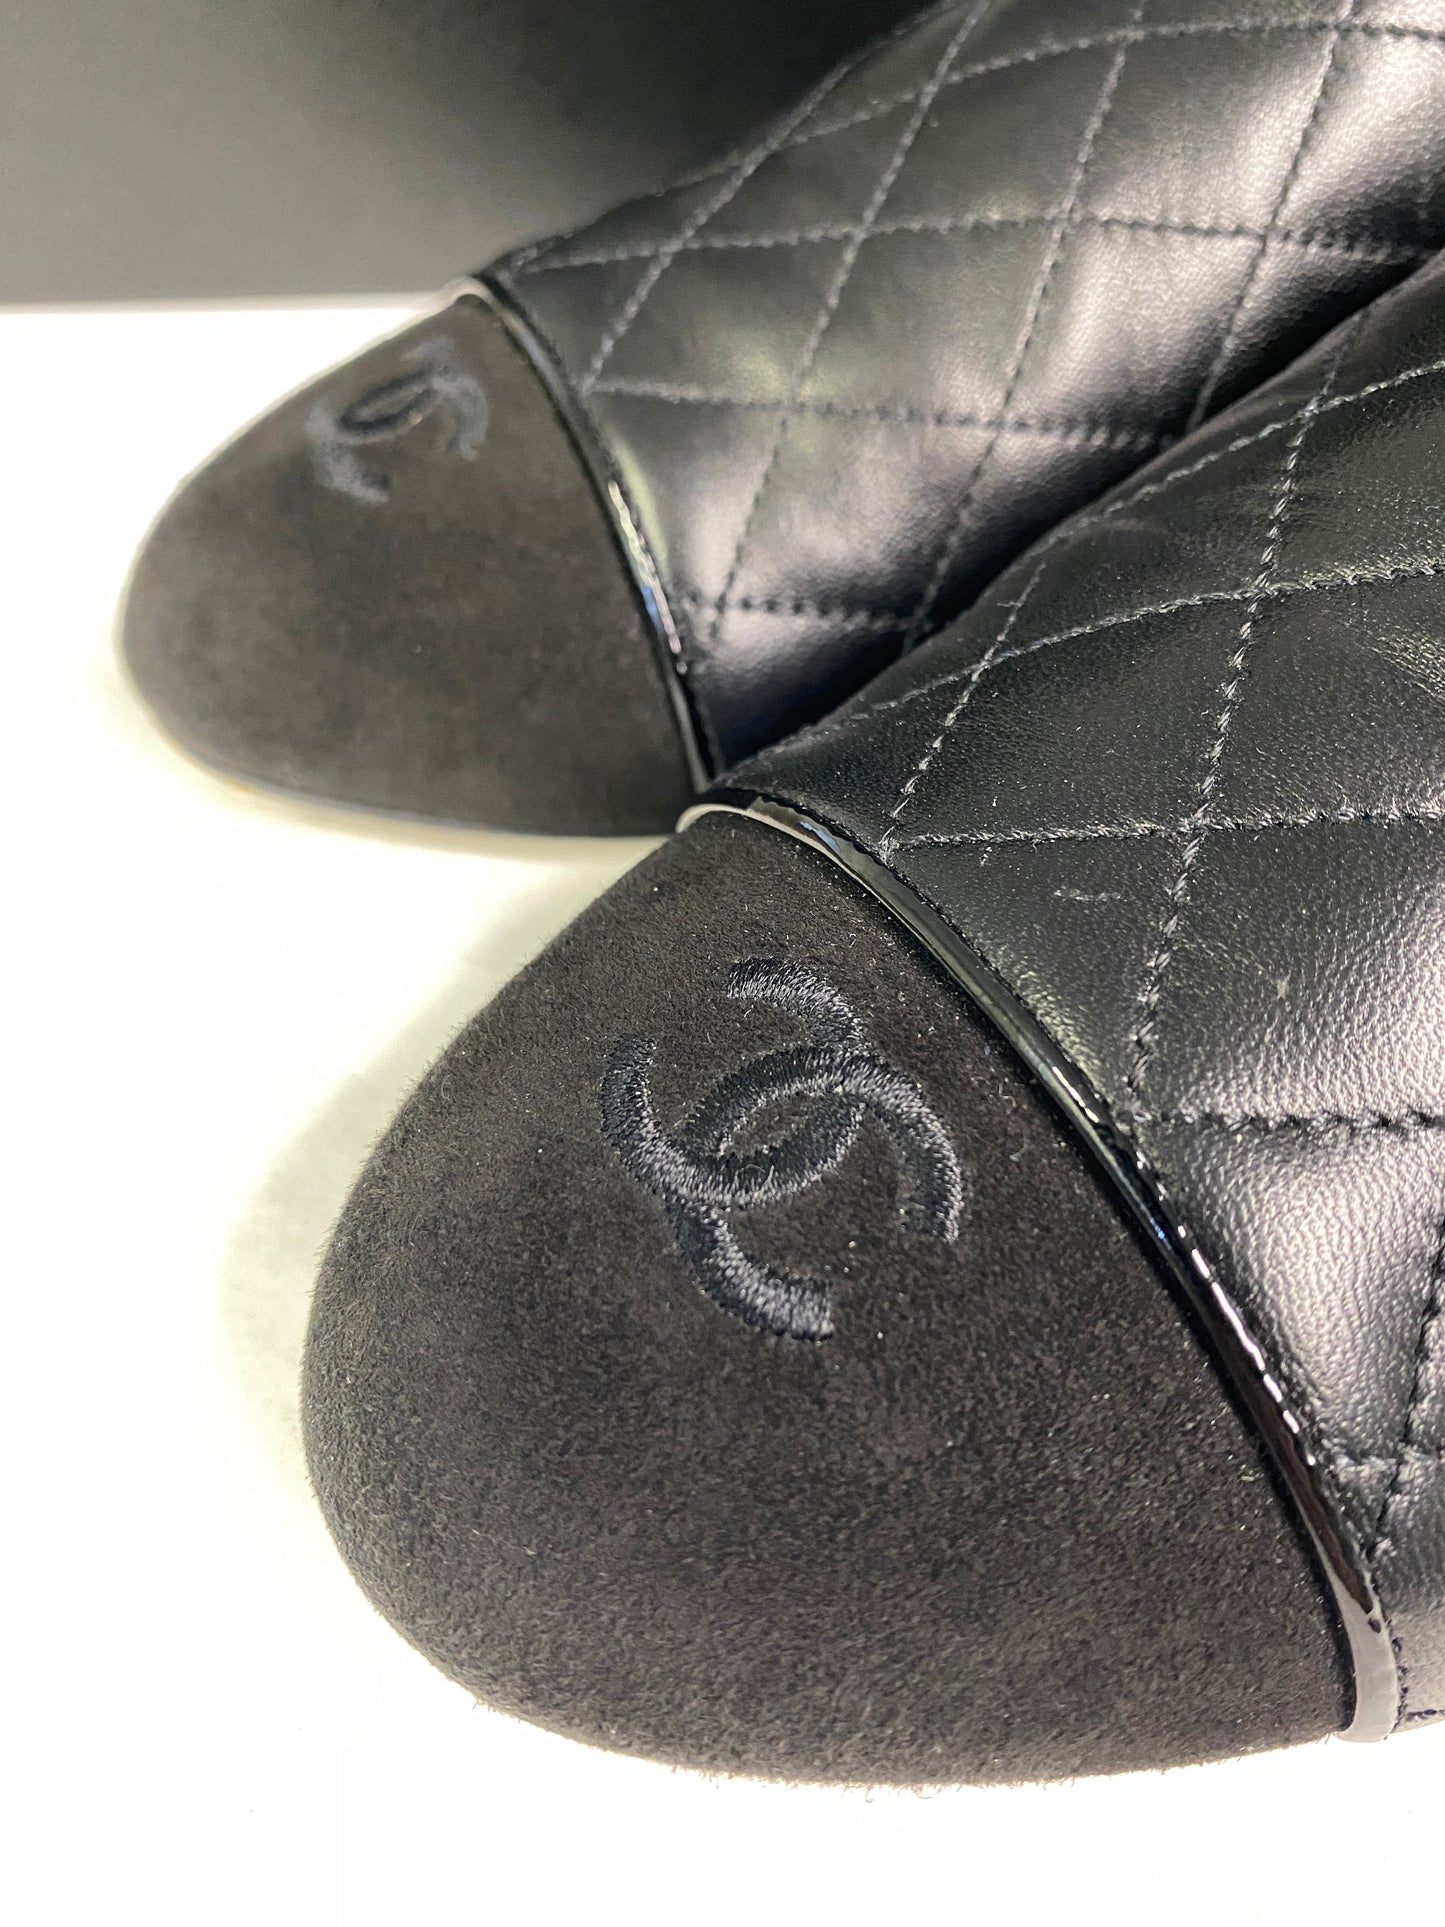 Chanel black leather quilted CC flat mules size 41.5 - boxed